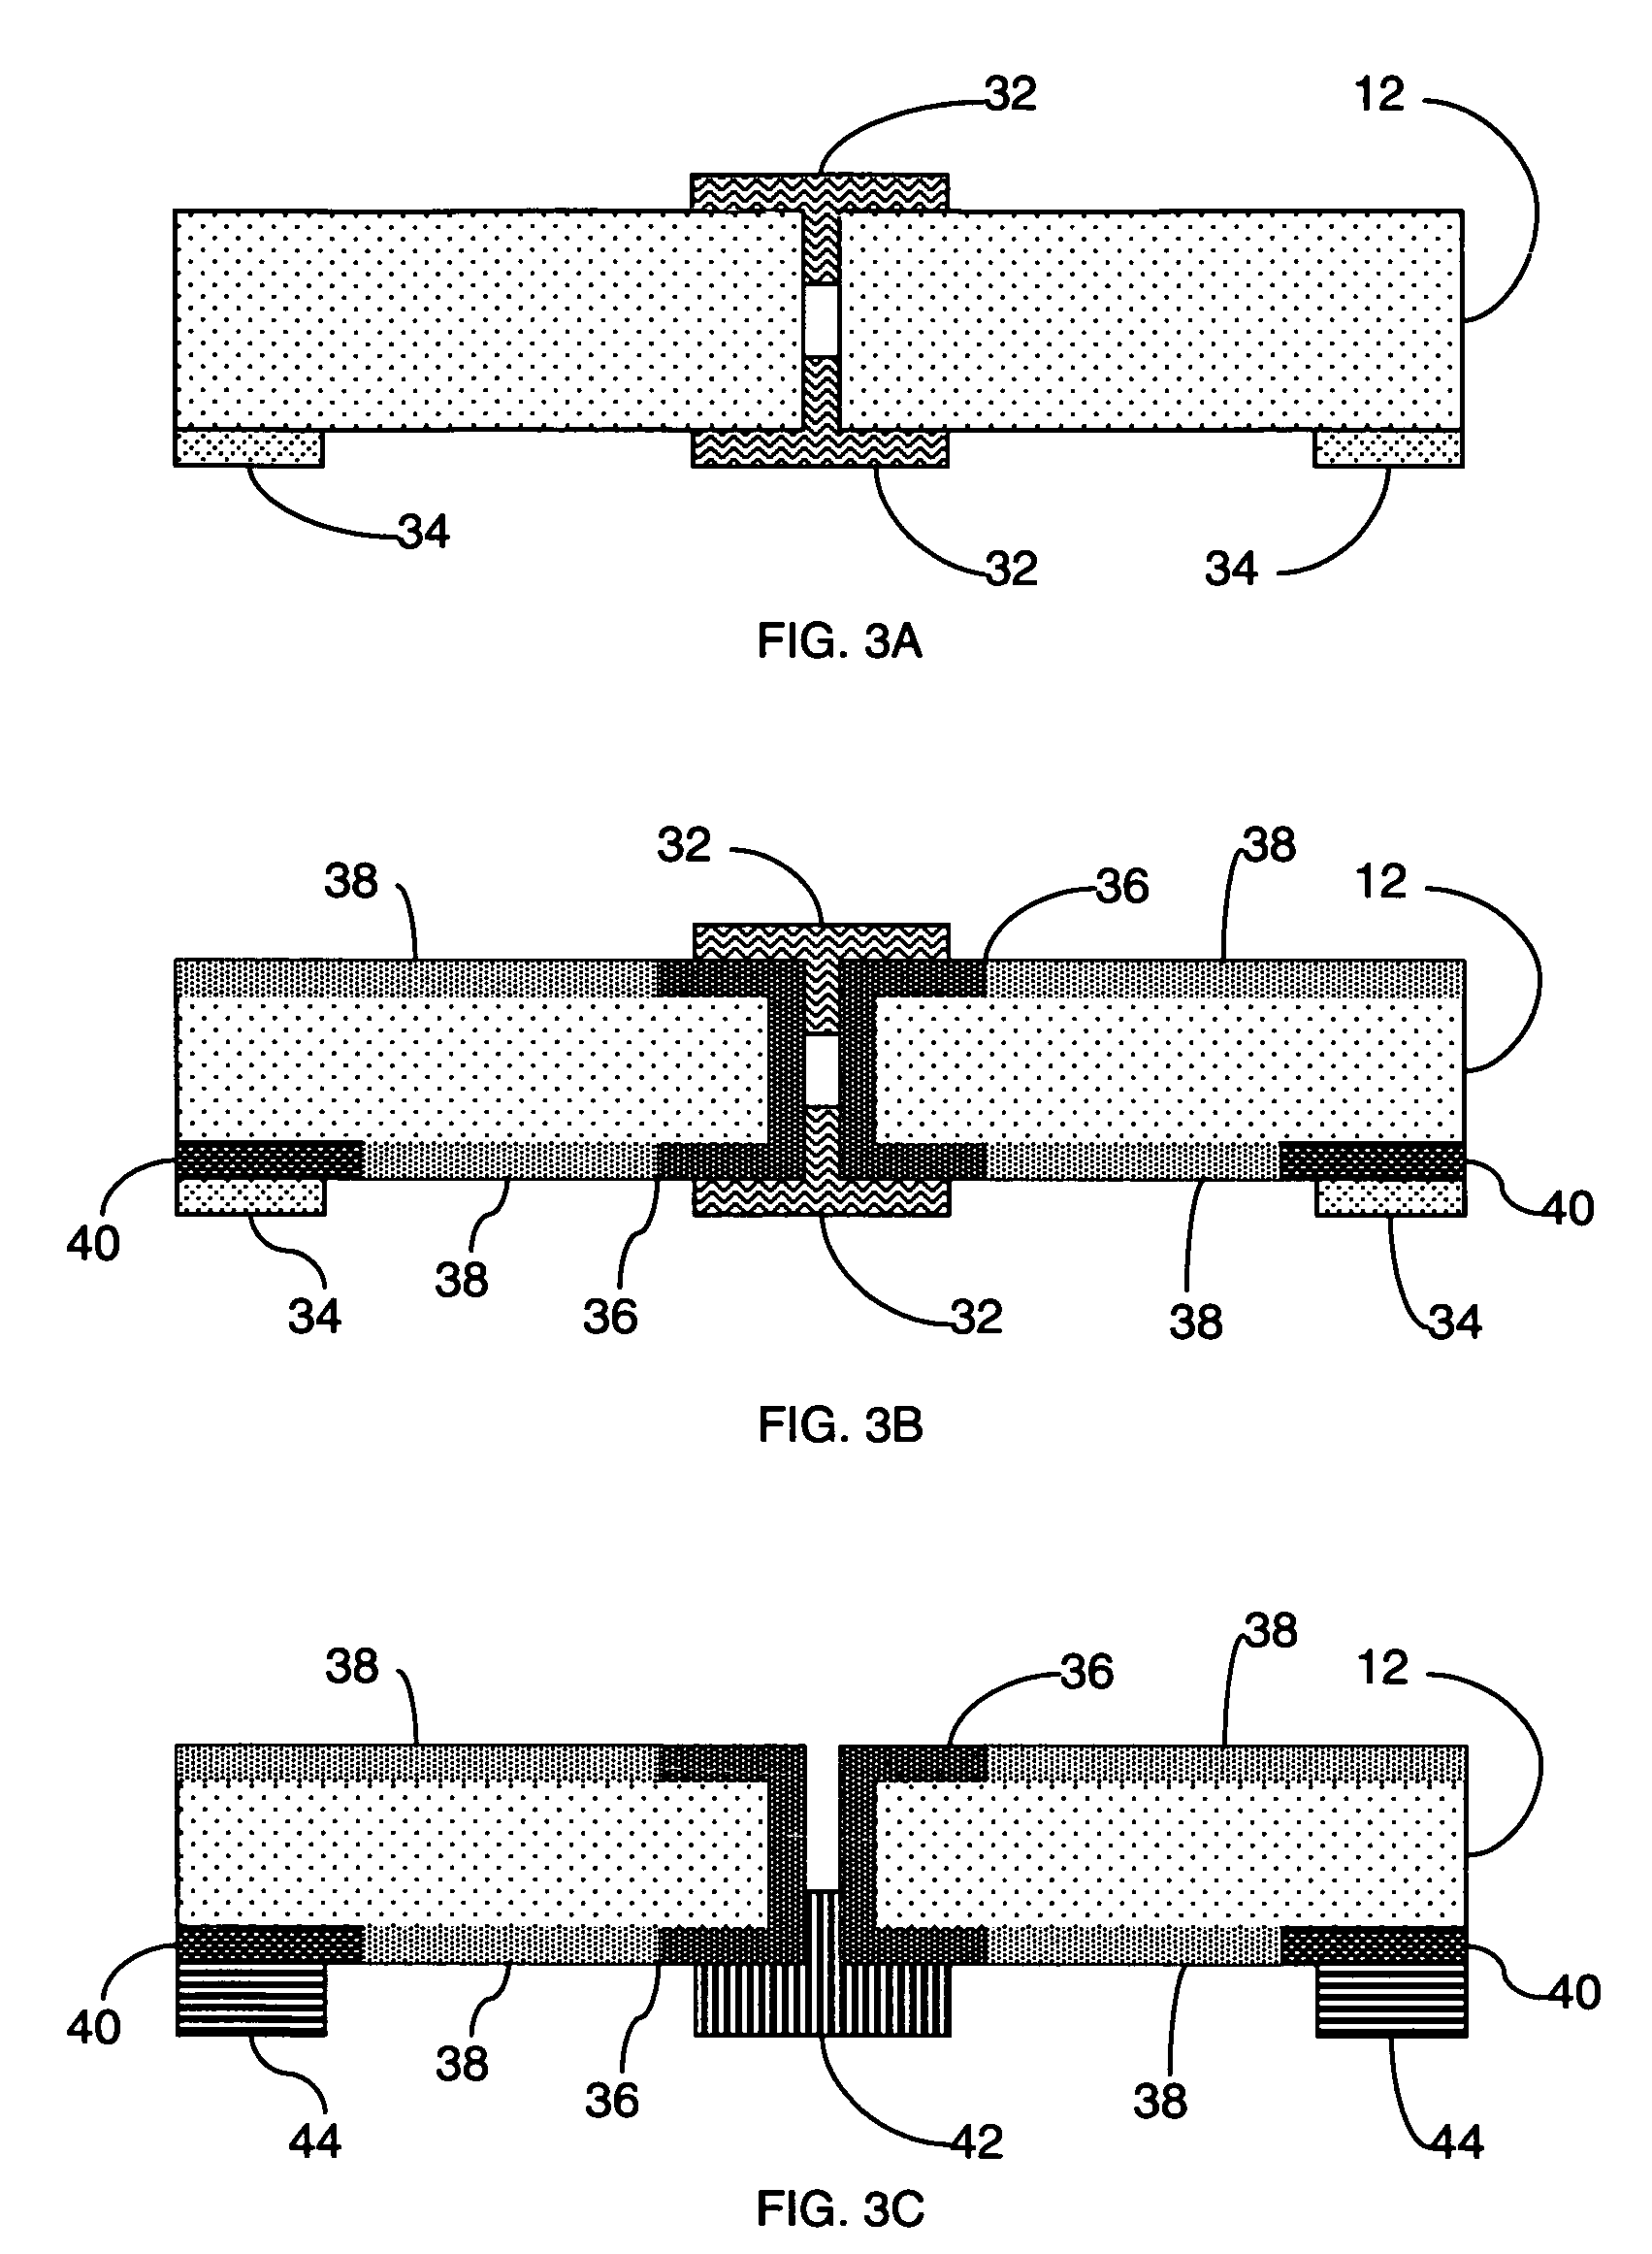 Back-contact solar cells and methods for fabrication